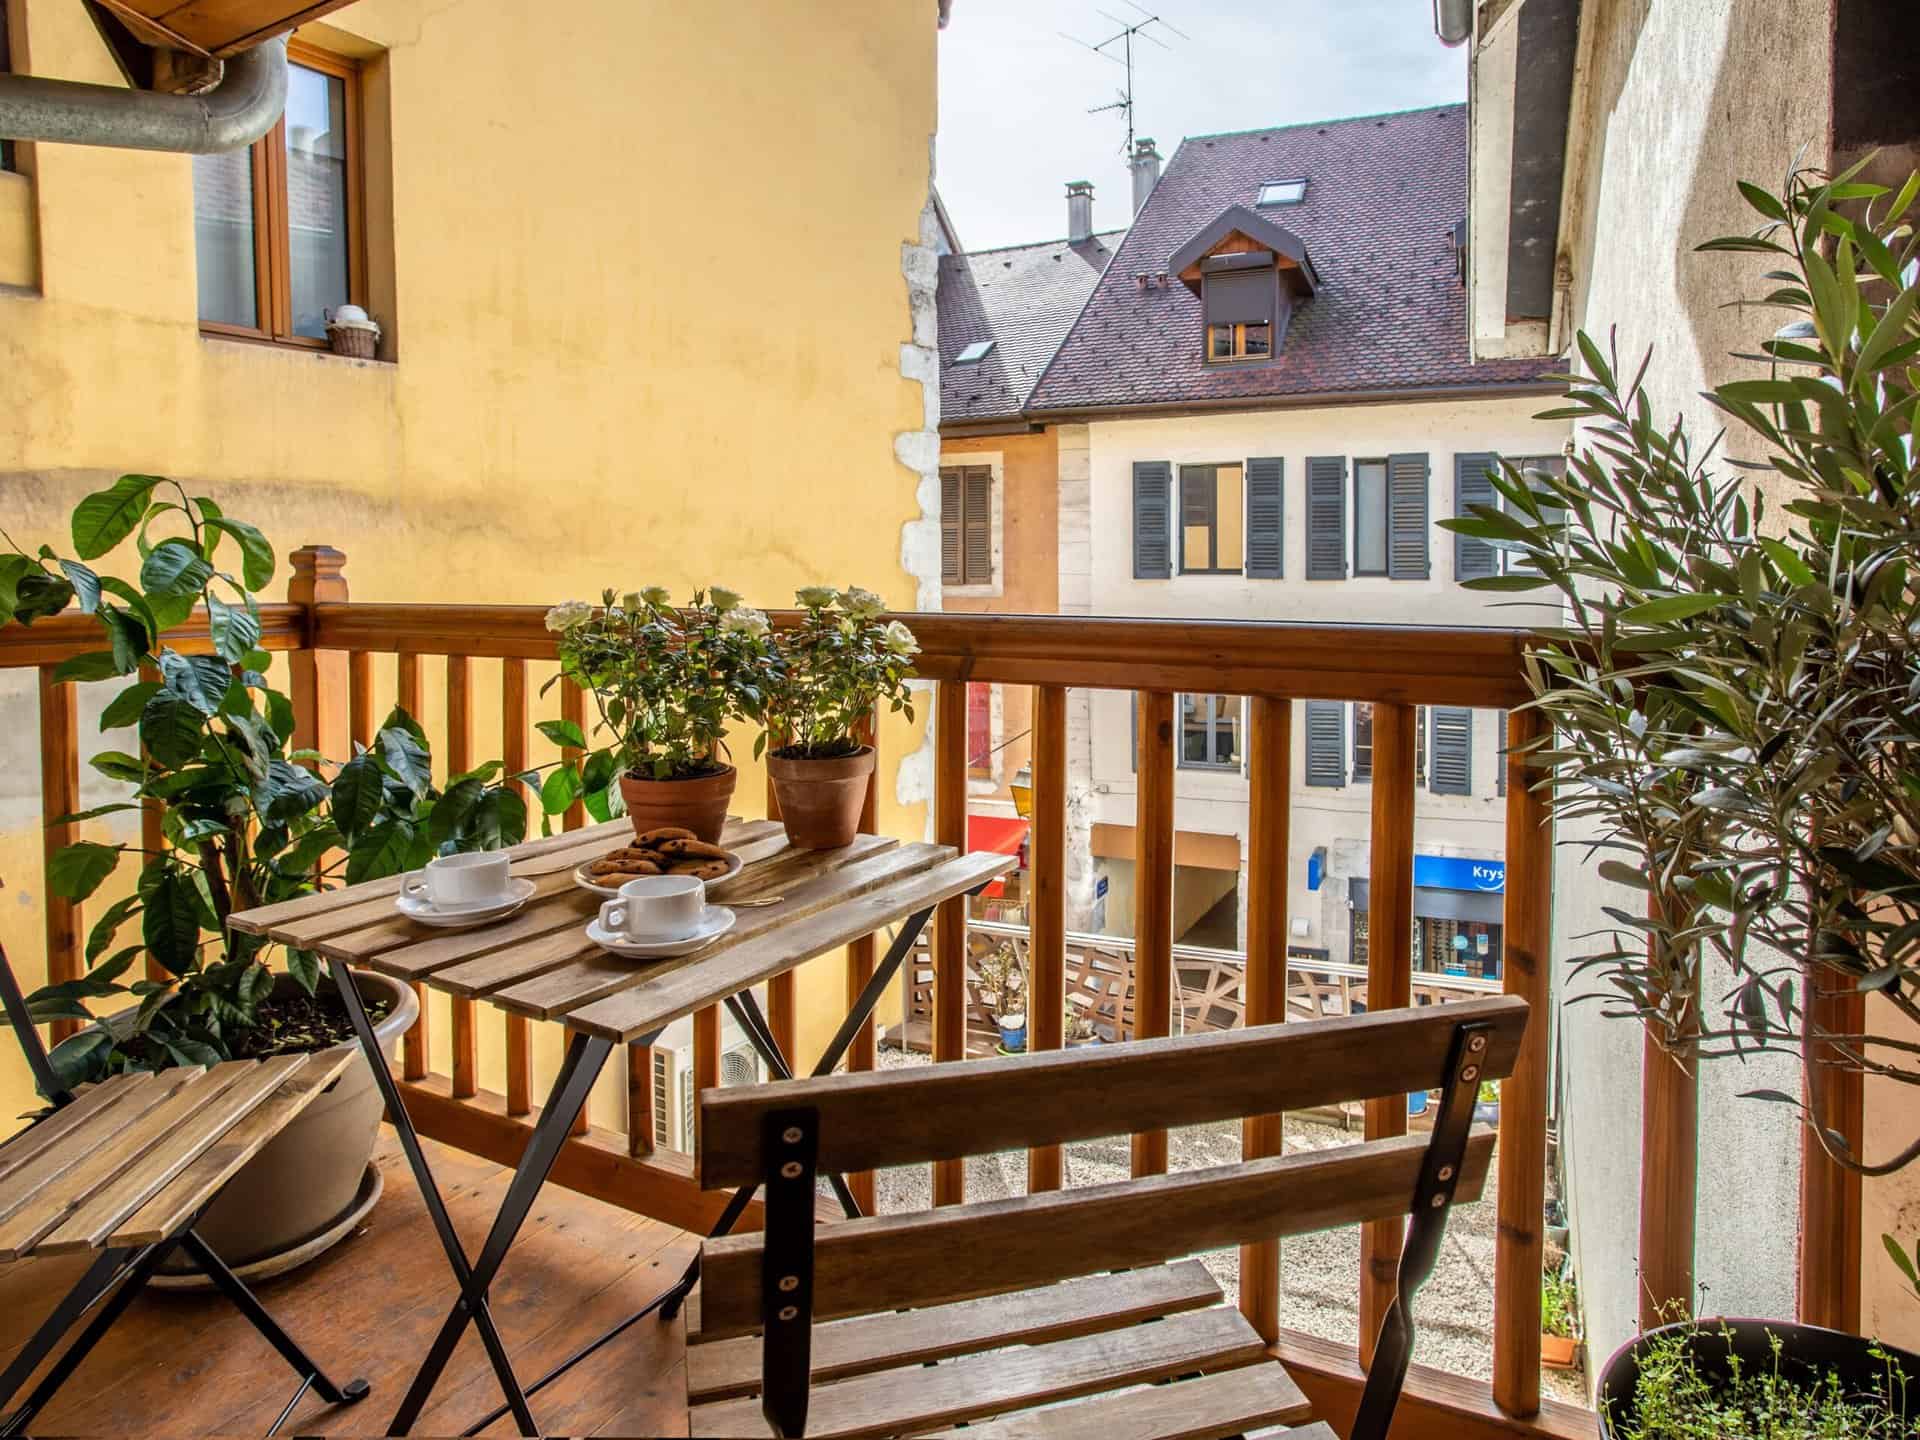 A table and two chairs on the balcony at  Petit SwanDoors, overlooking a street in Annecy.